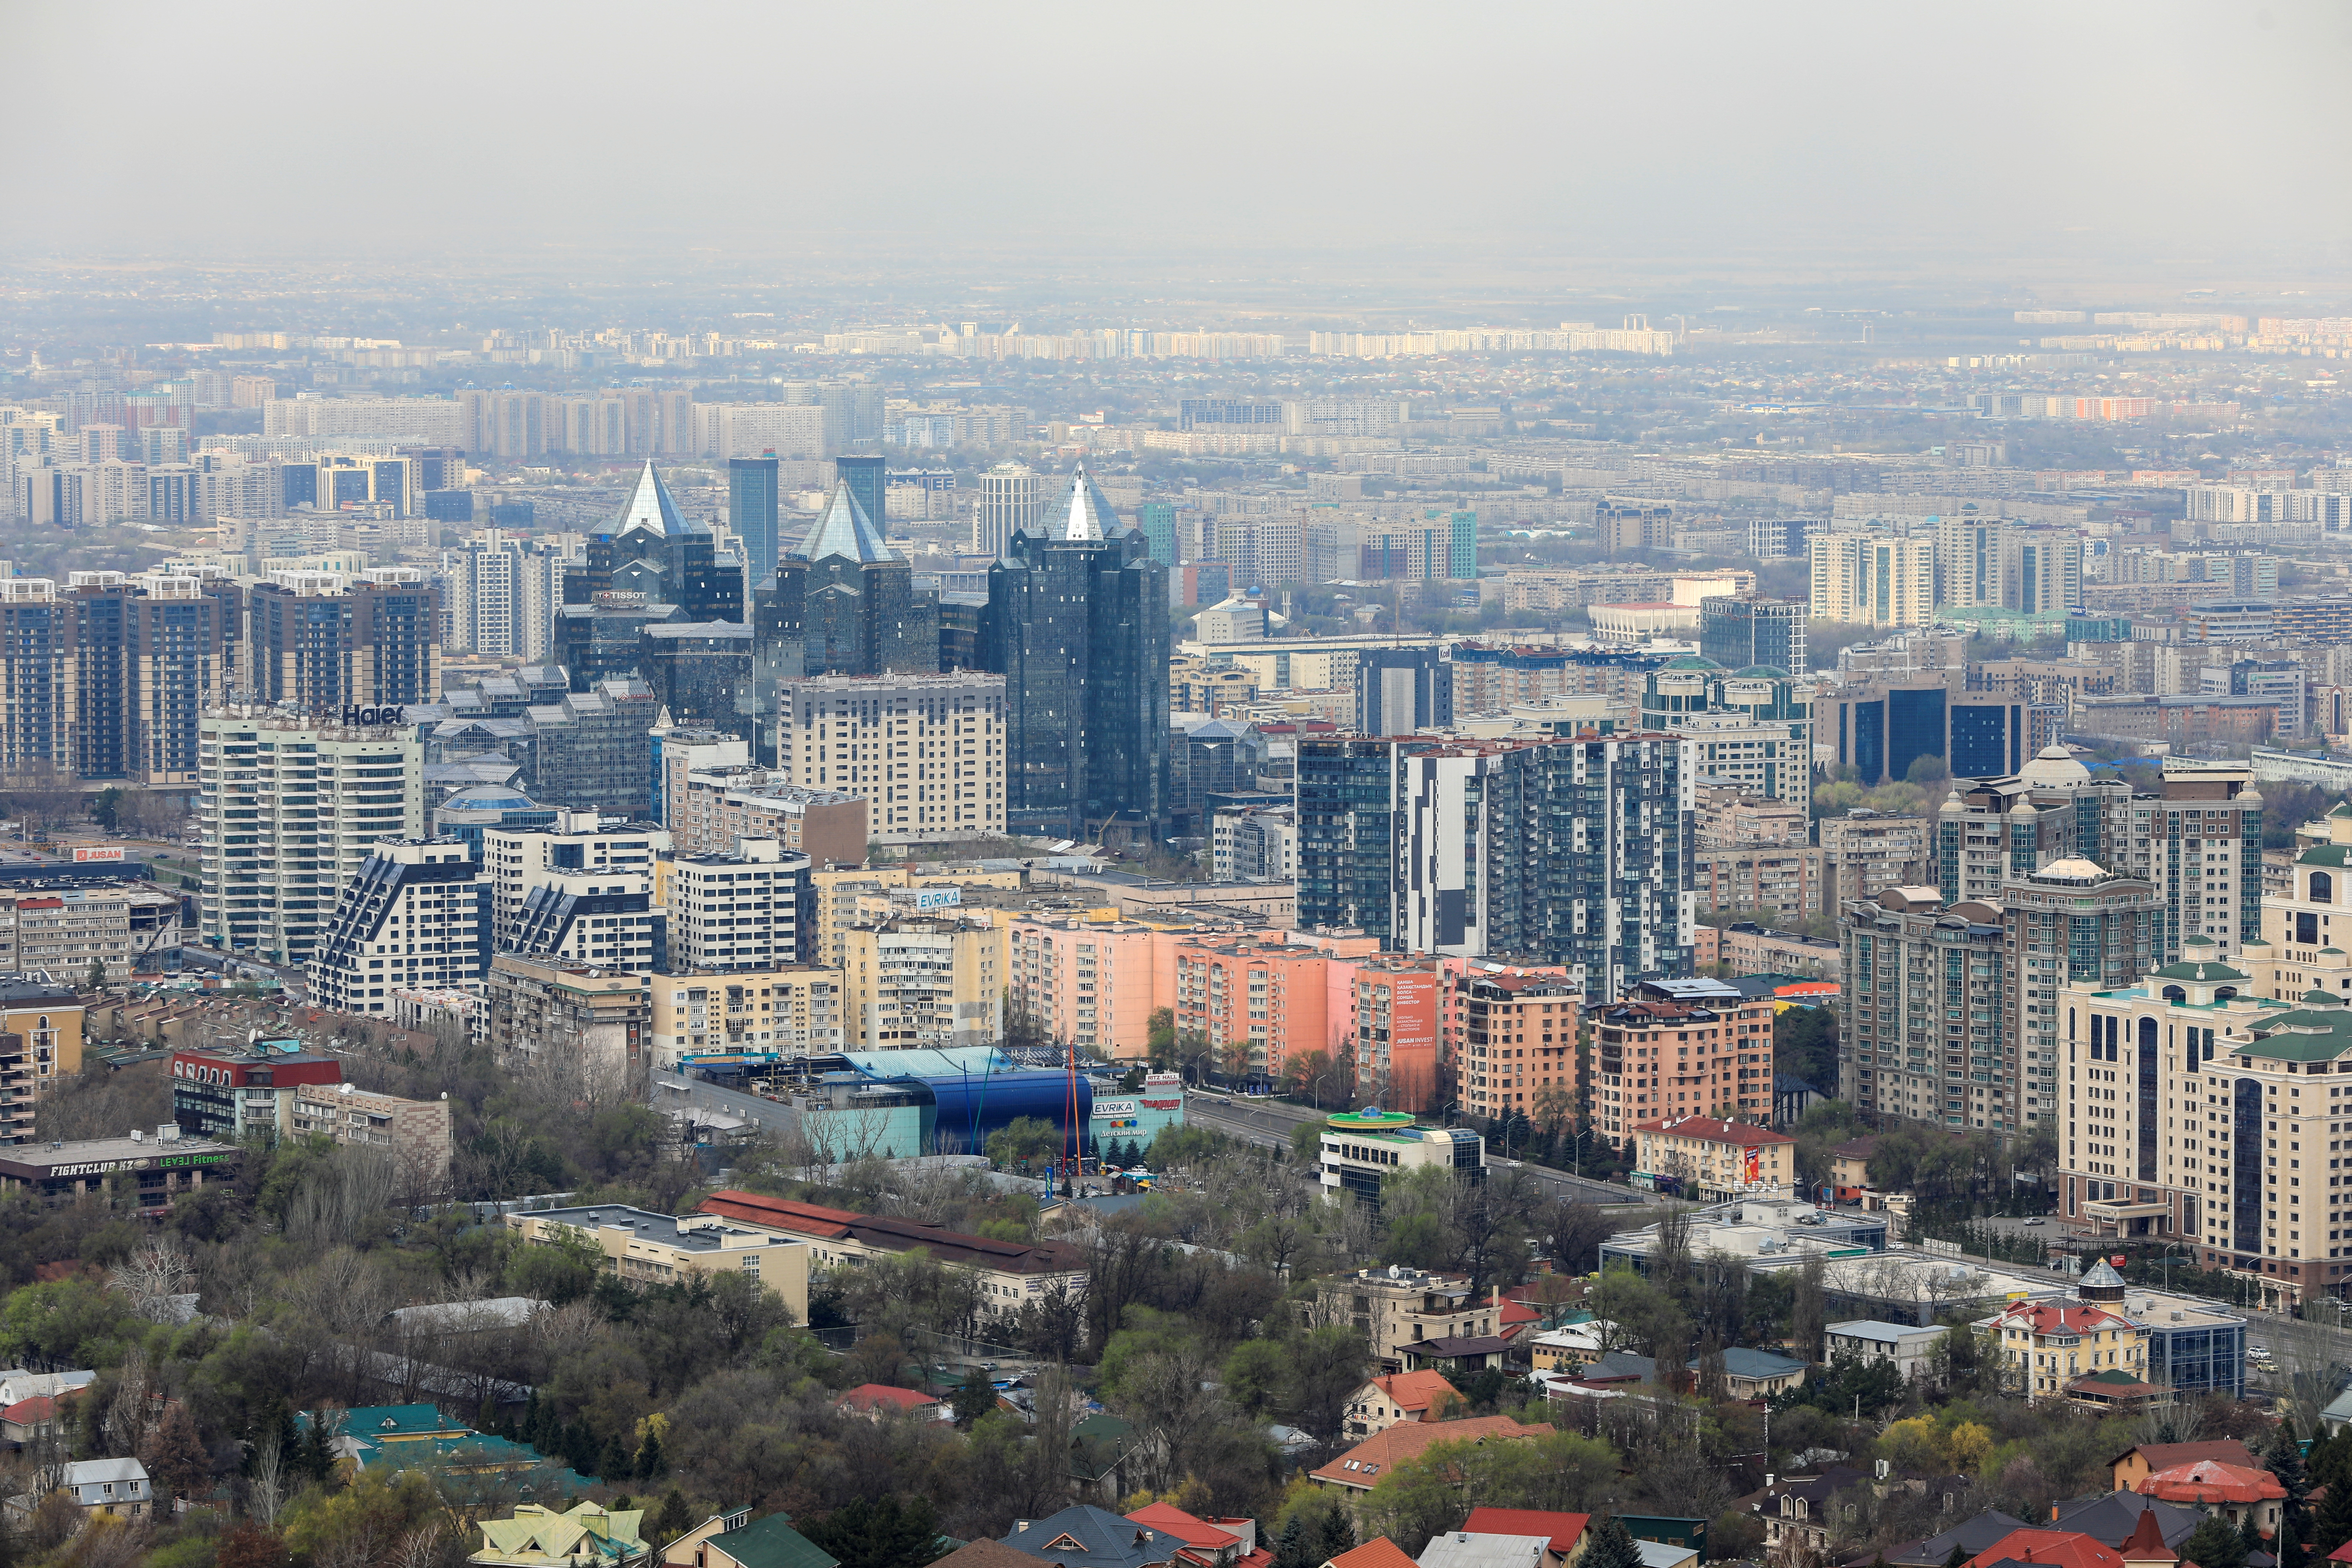 A general view shows the city of Almaty